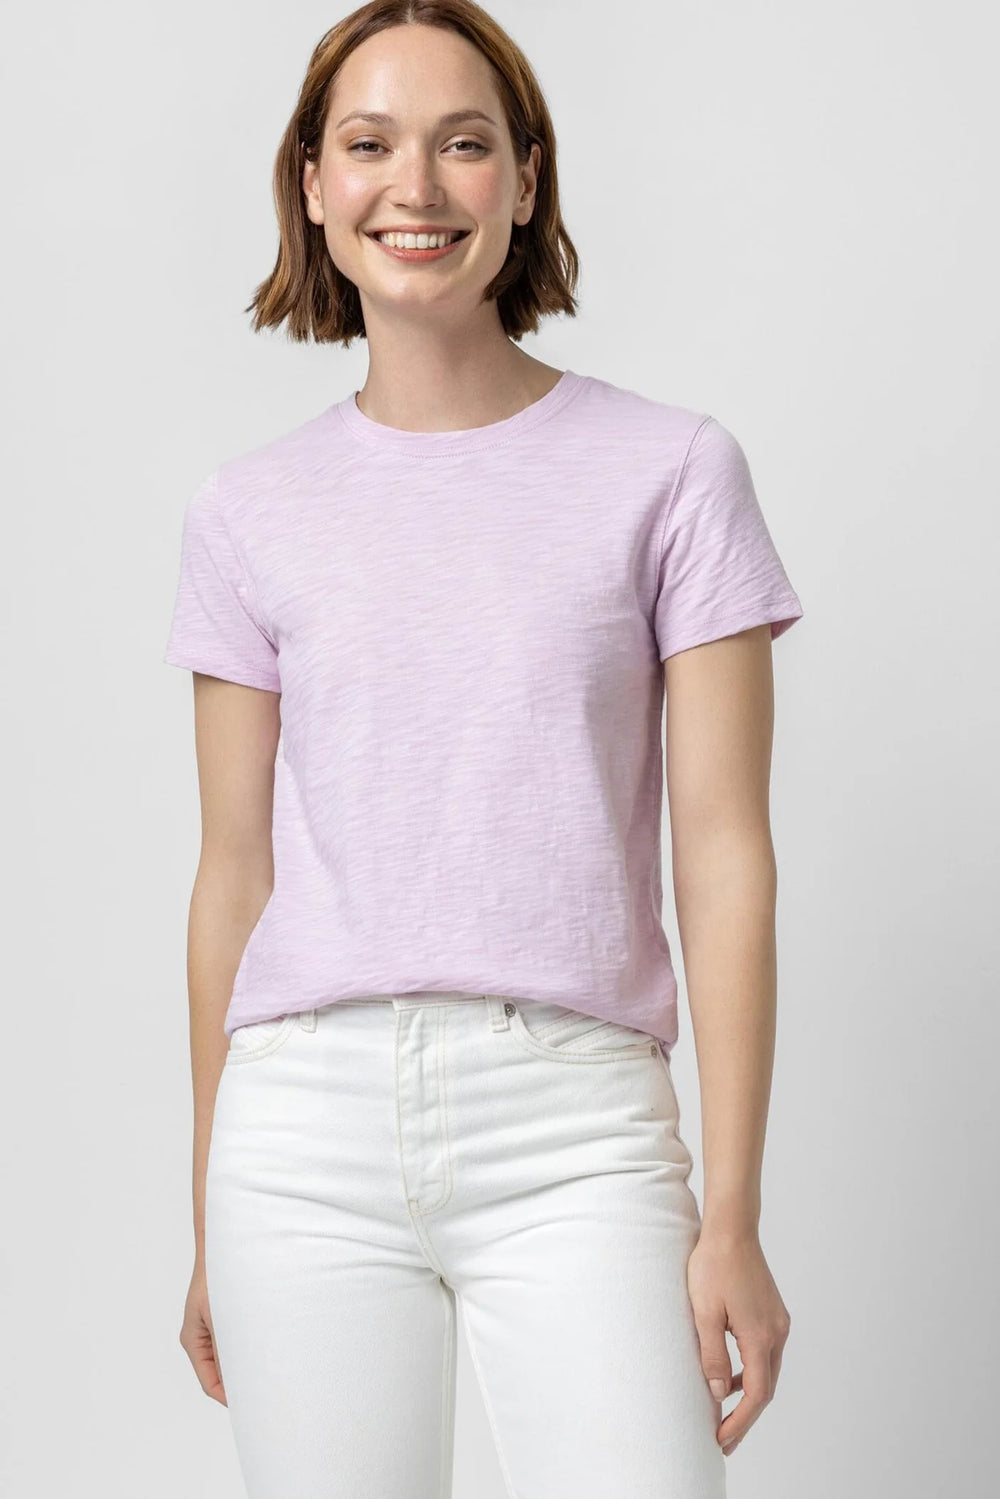 Short Sleeve Crewneck in Orchid - Madison&